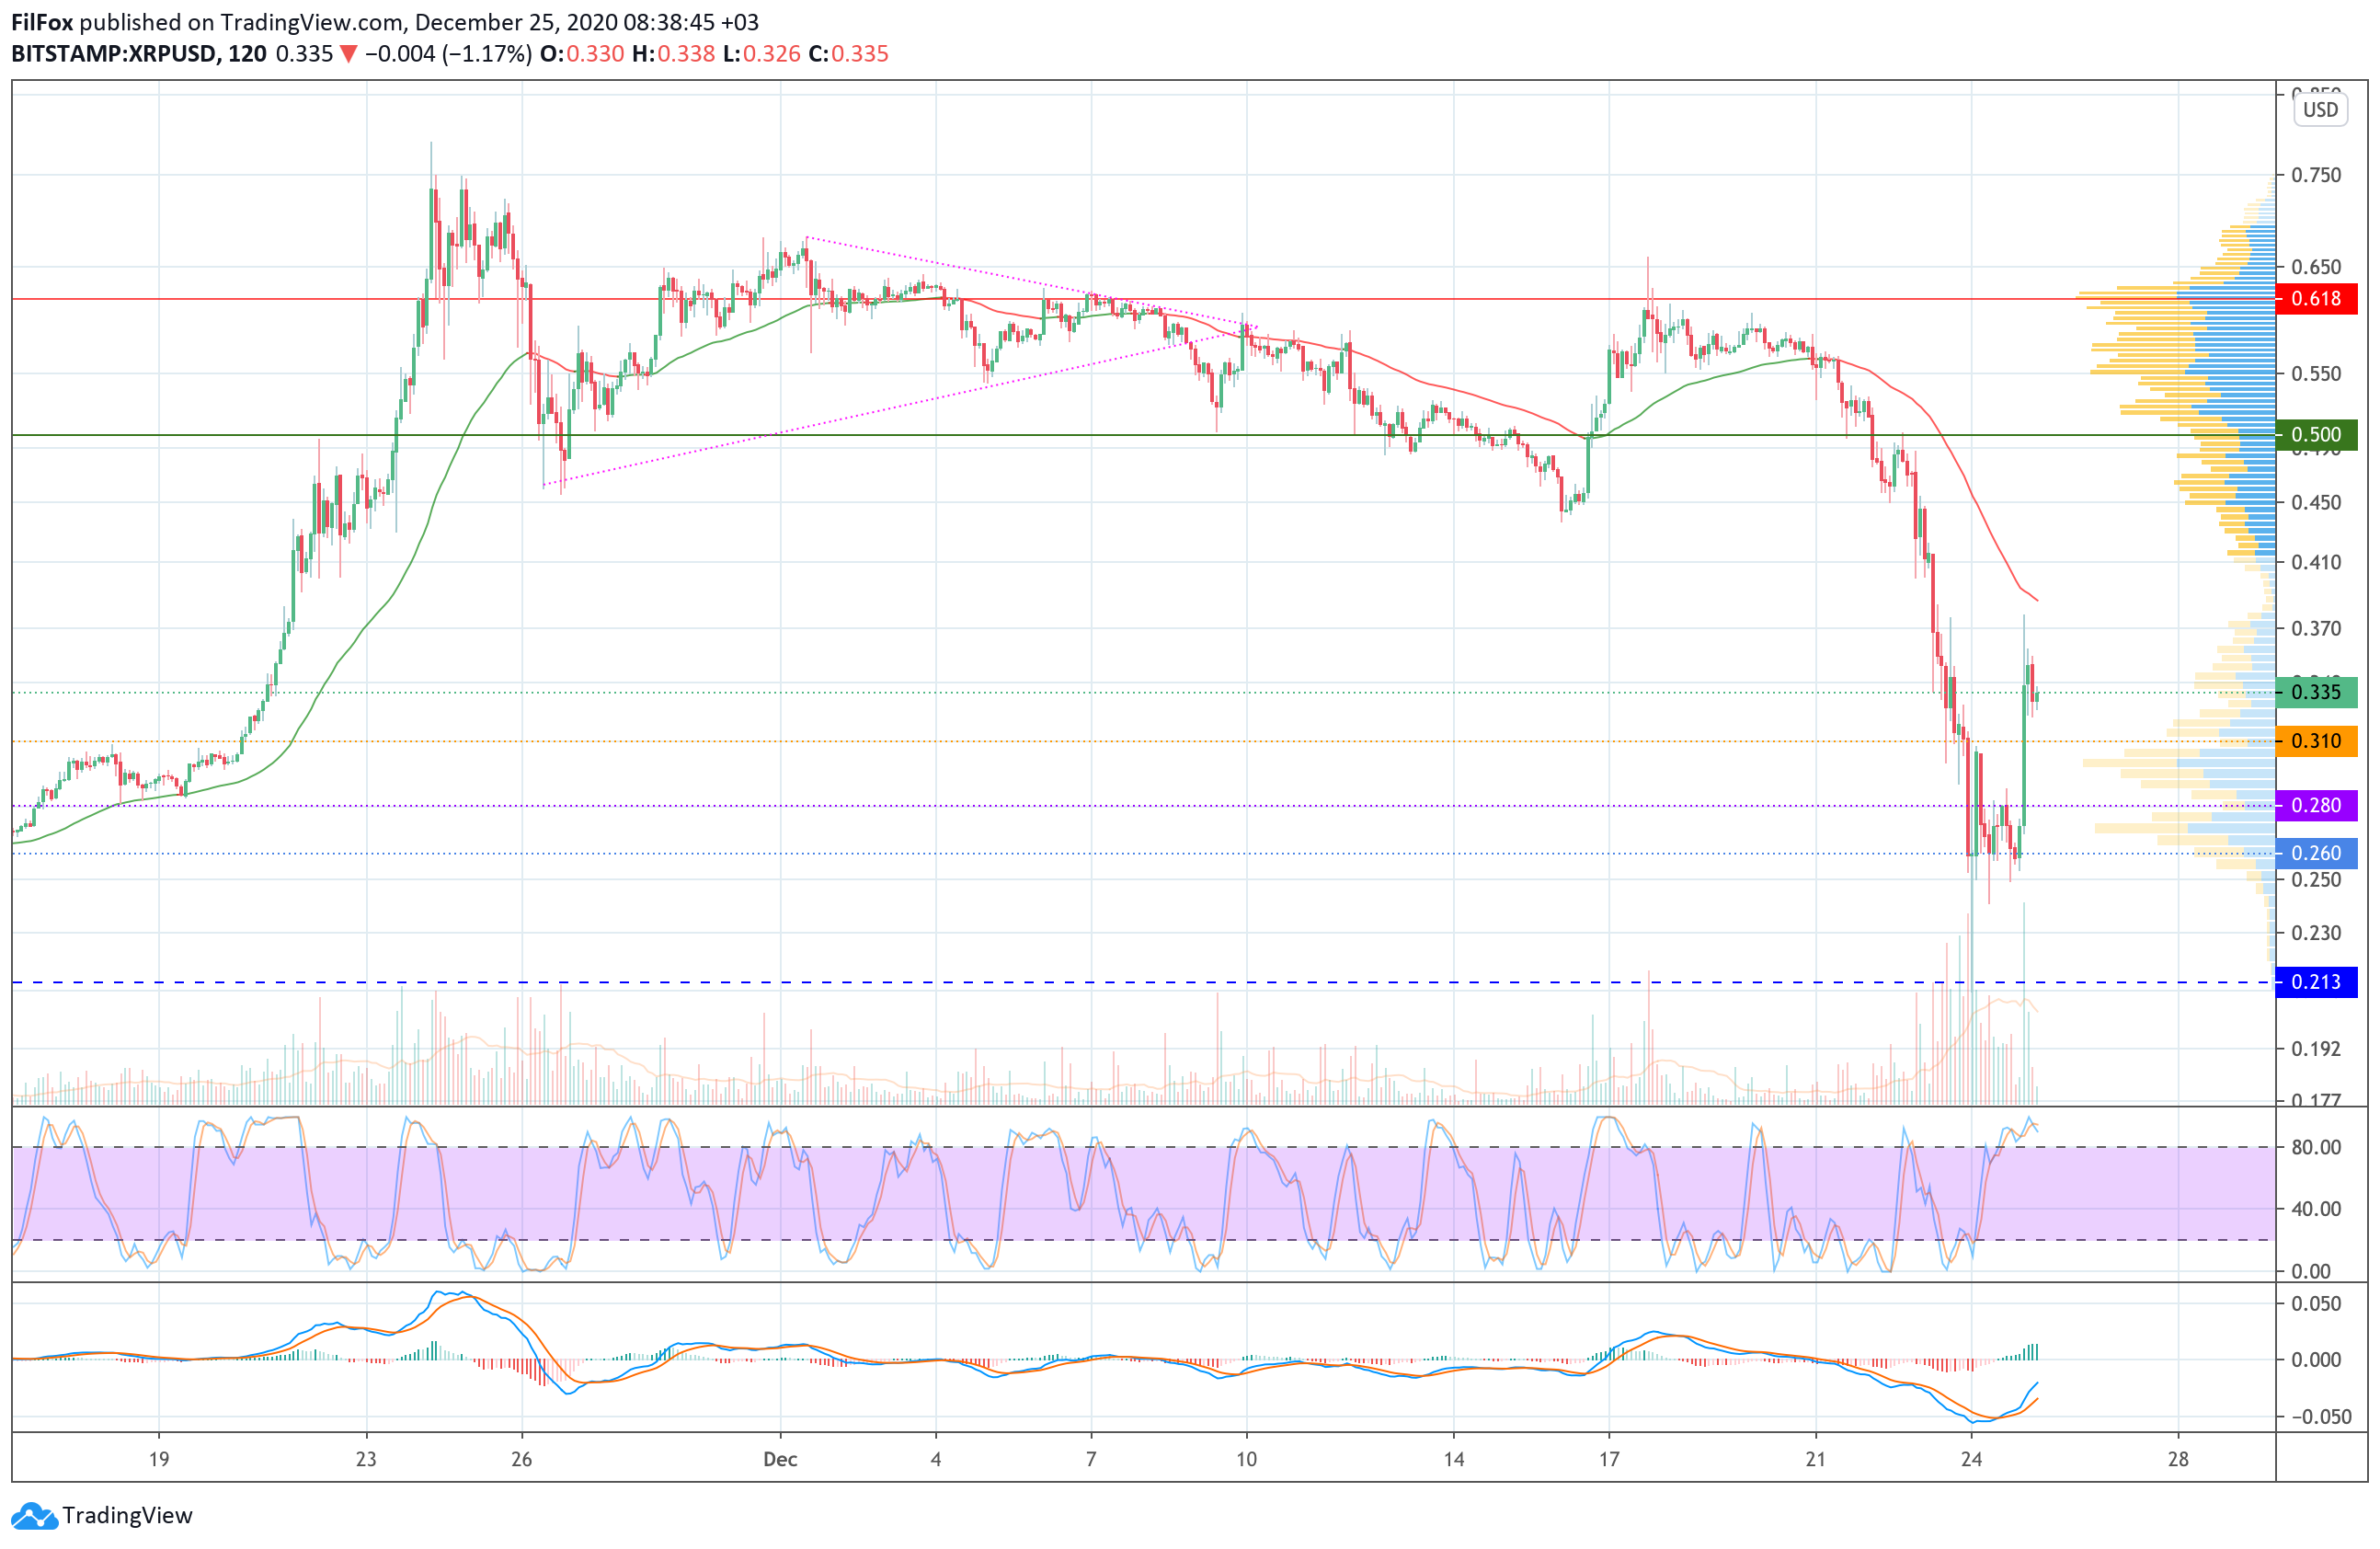 Analysis of prices for Bitcoin, Ethereum, Ripple for 12/25/2020